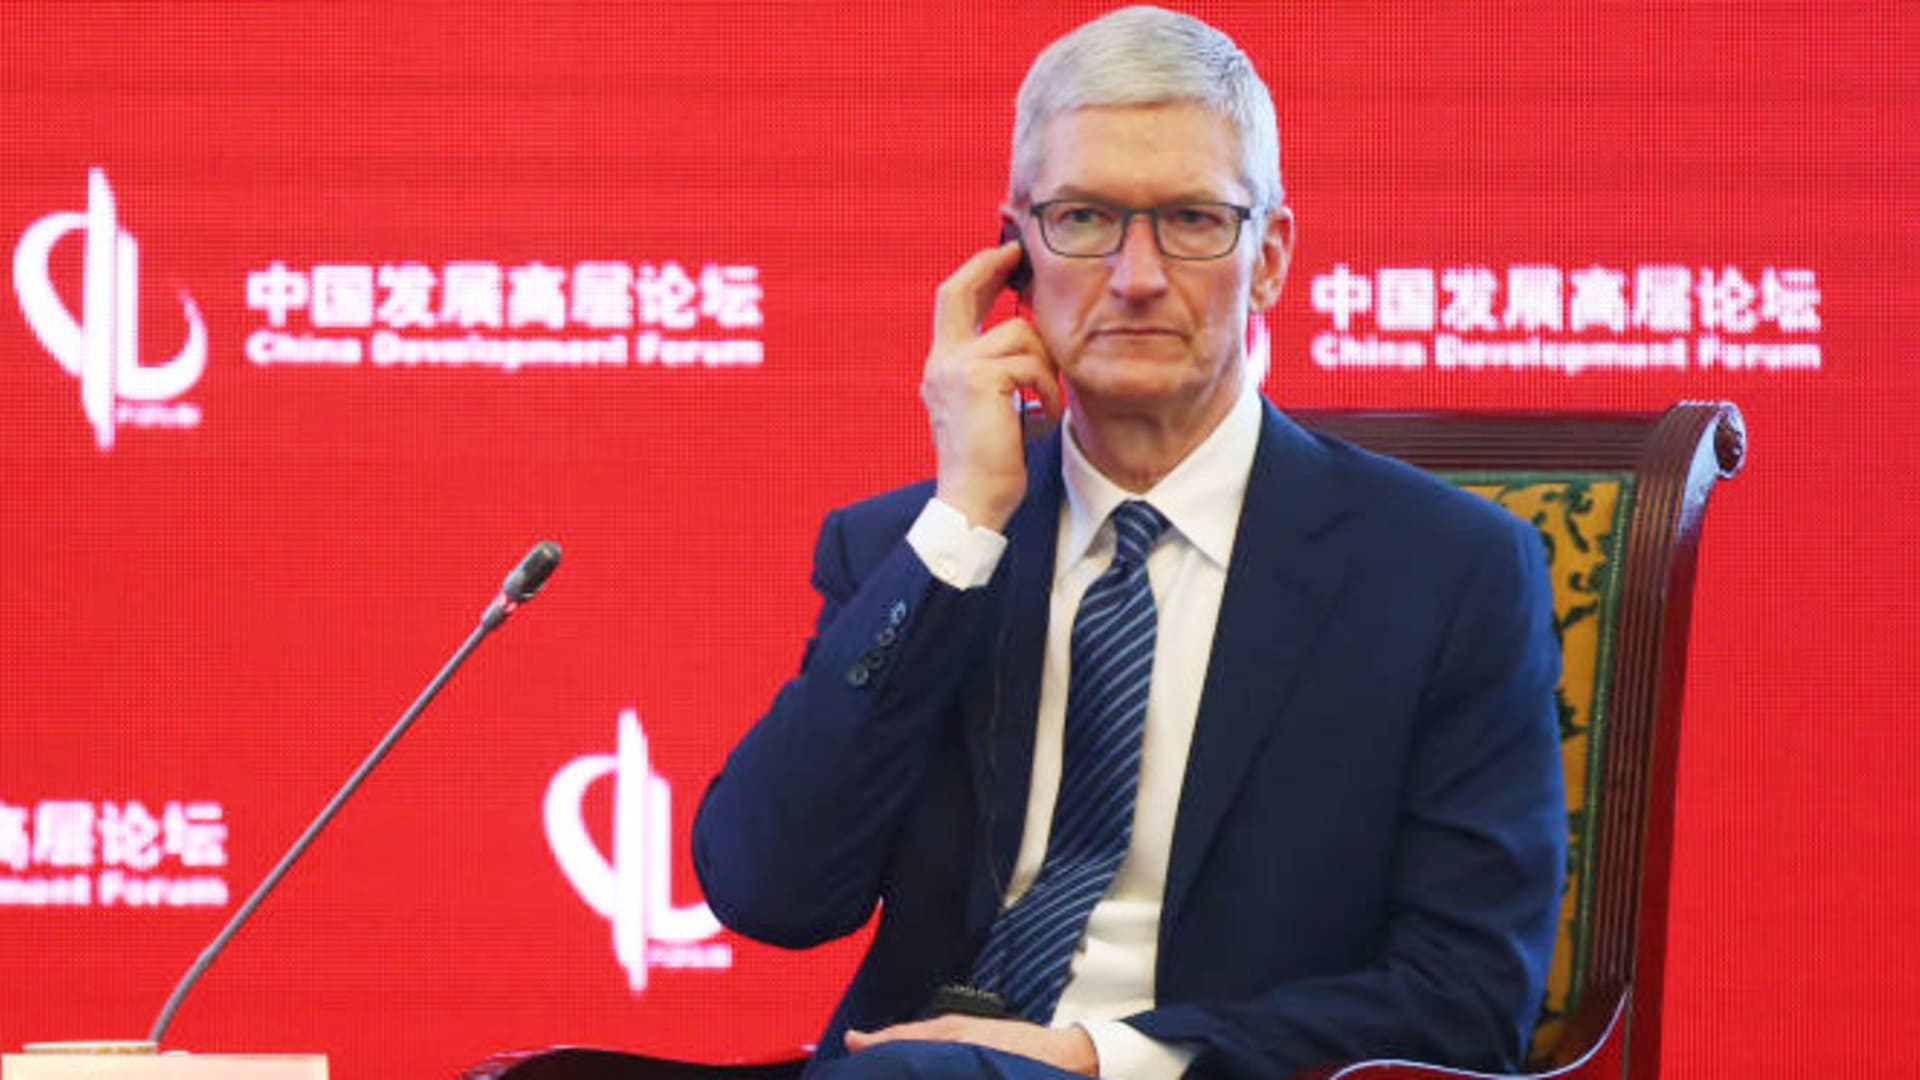 China says it hasn’t banned iPhones or foreign devices for government staff